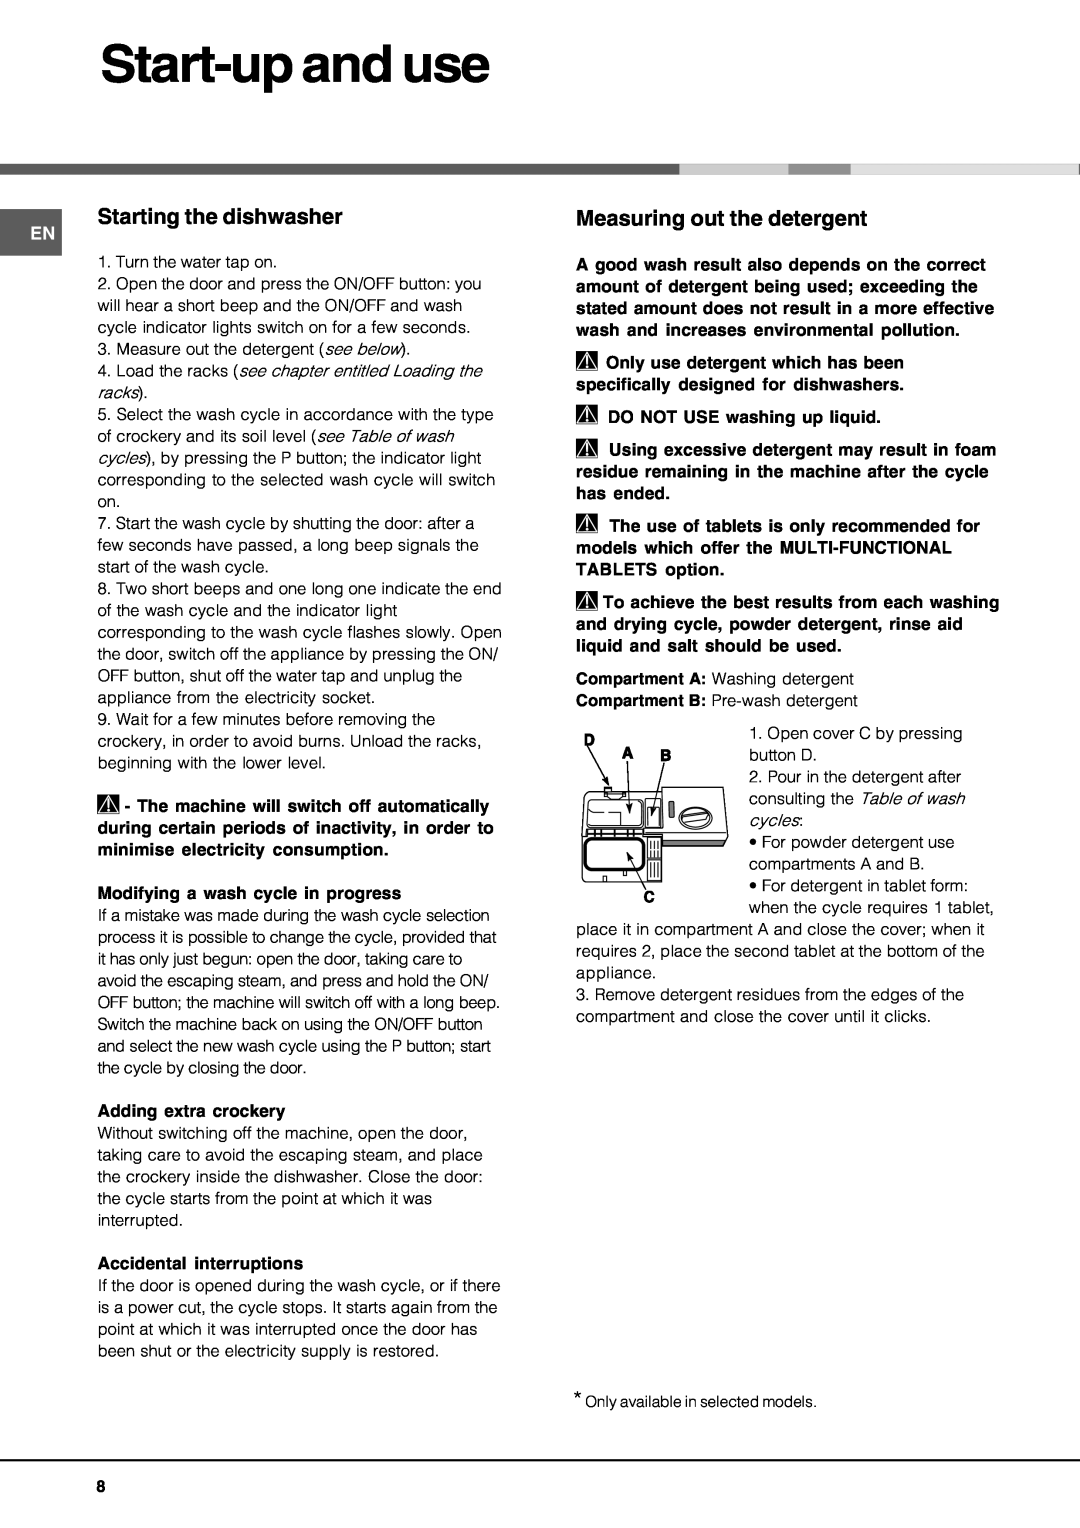 Hotpoint lft 04 manual Start-up and use, Starting the dishwasher, Measuring out the detergent 